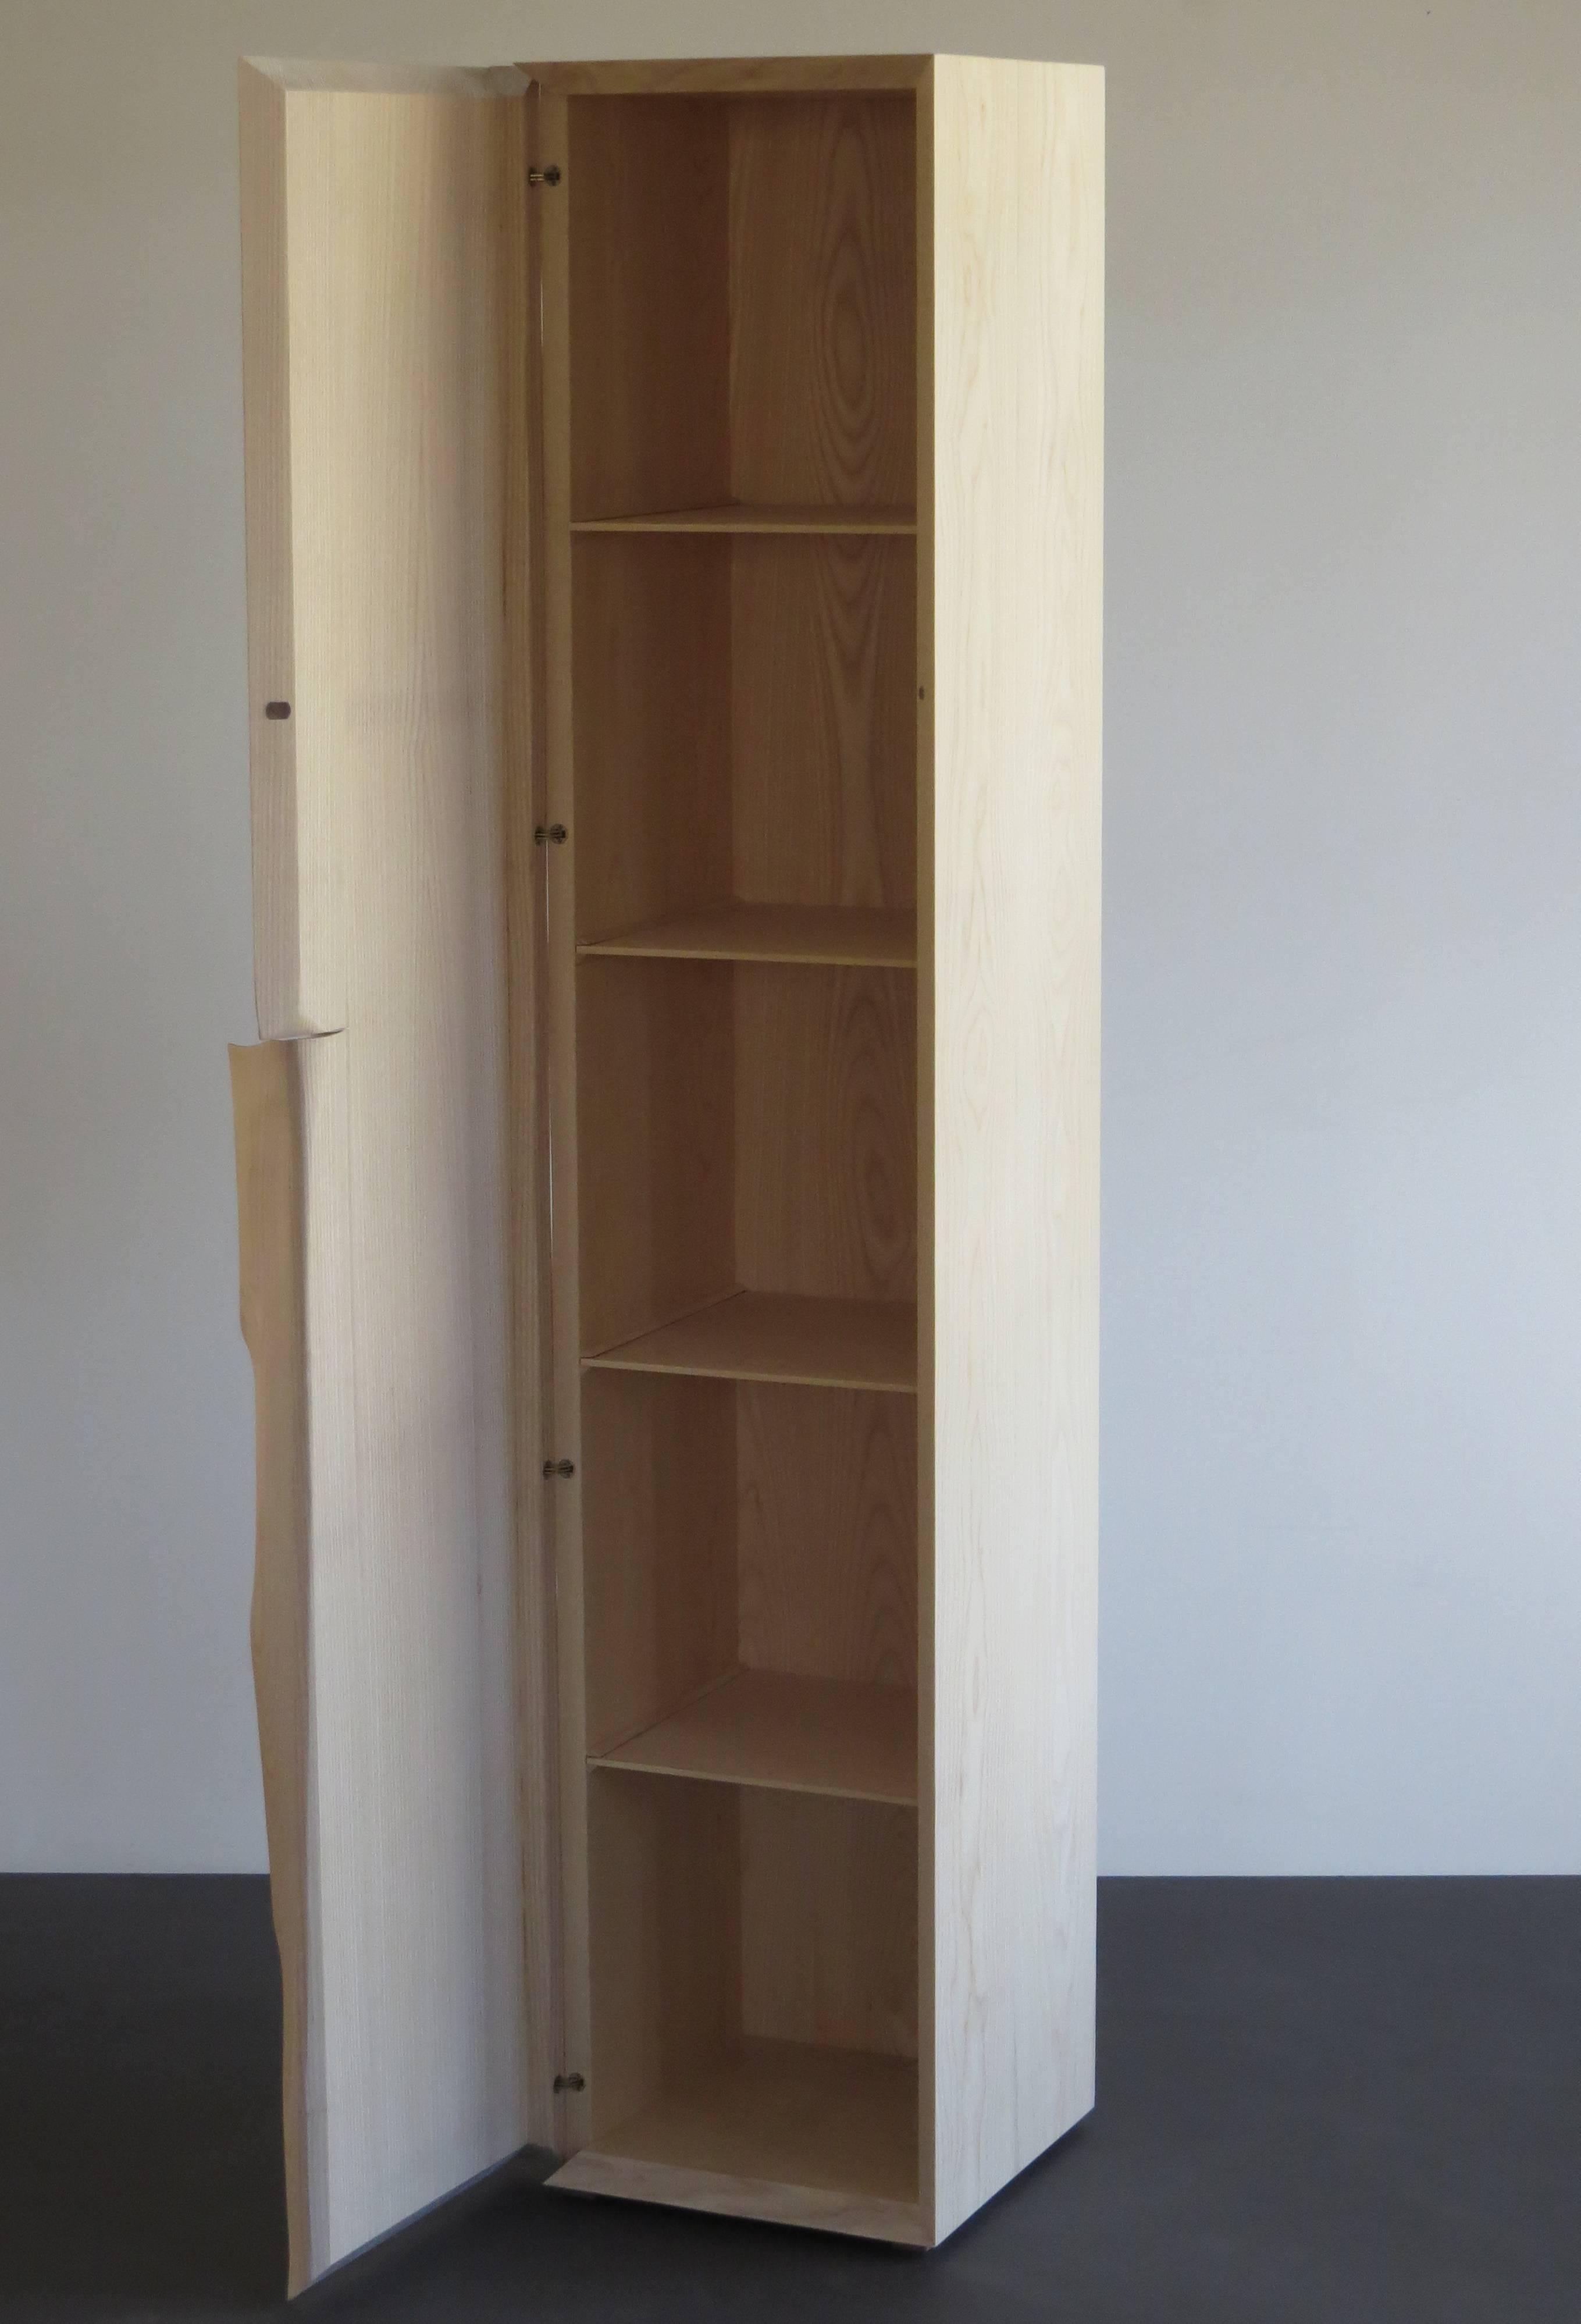 Tower Cabinet, Handmade, Solid Wood, Made in Germany, High Cabinet In New Condition For Sale In Dietmannsried, Bavaria